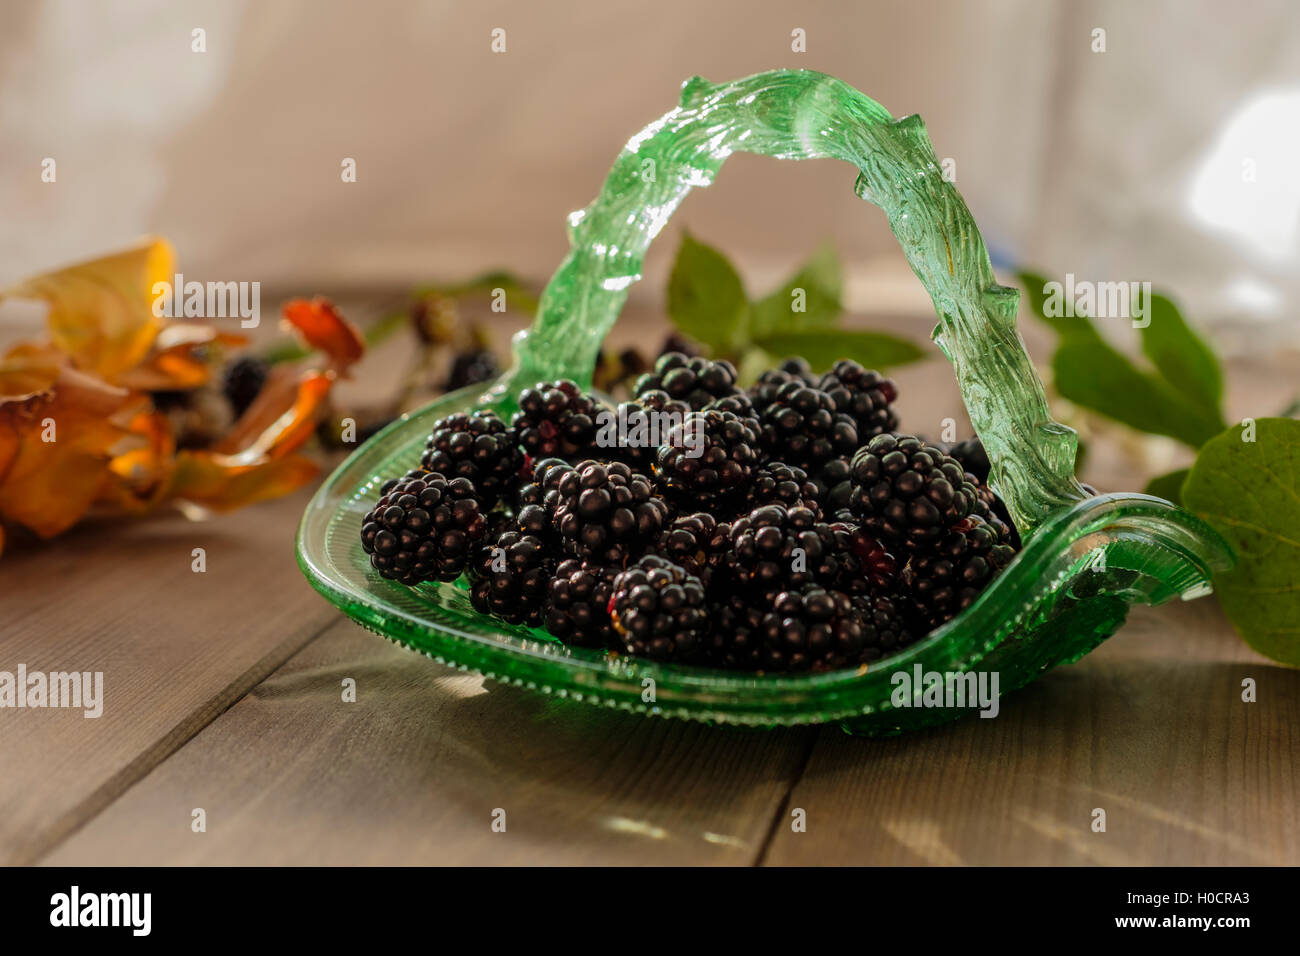 Autumnal table setting of juicy blackberries in a vintage green glass basket on wooden table with out of focus foliage Stock Photo